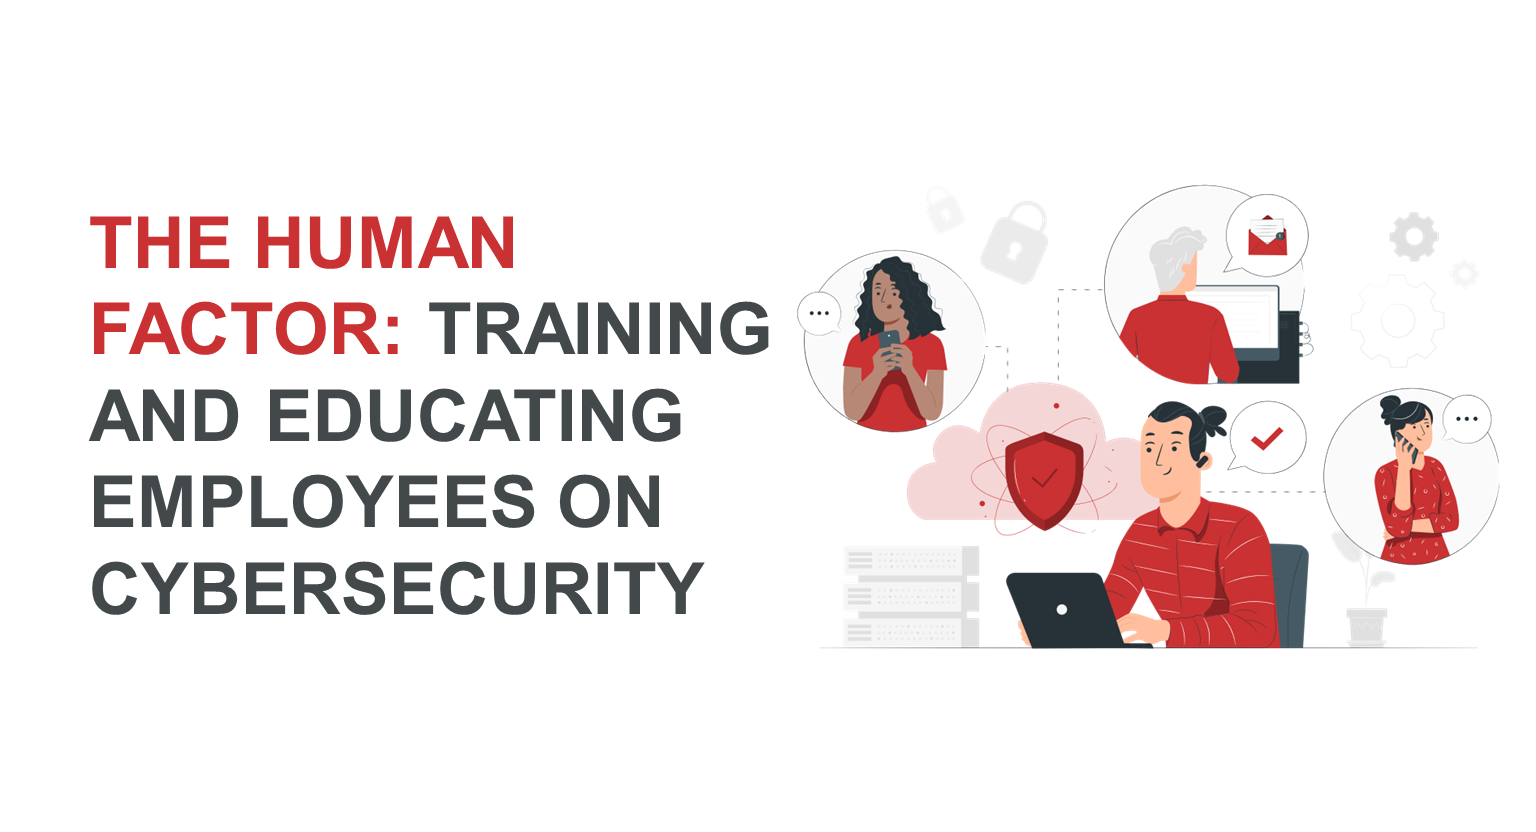 The Human Factor: Training and Educating Employees on Cybersecurity